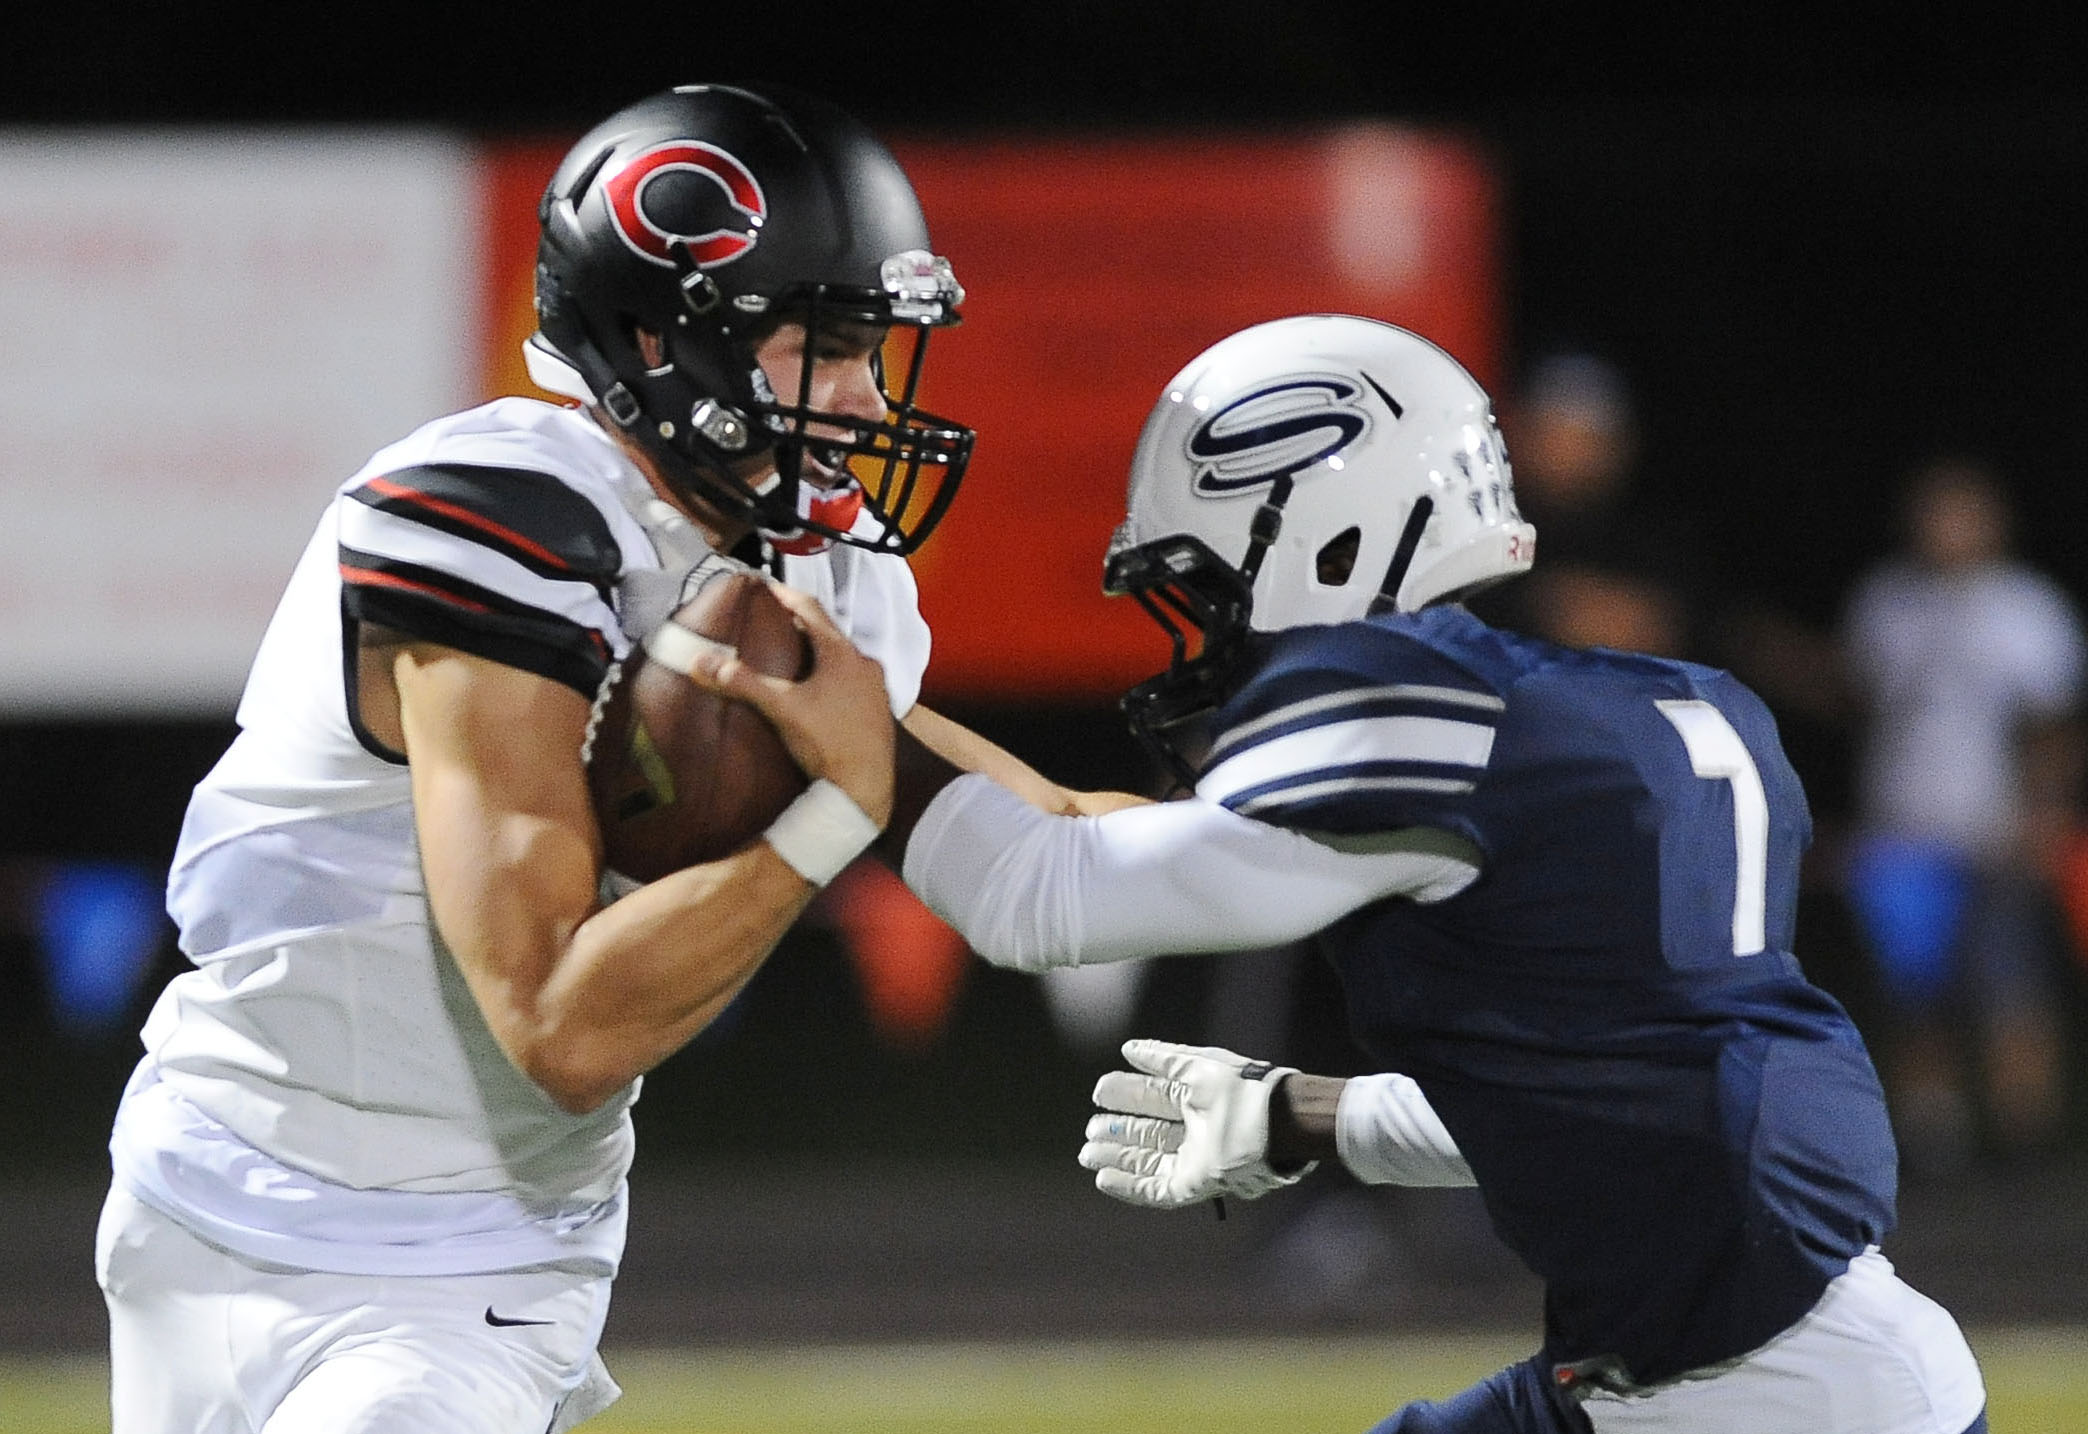 Camas player Laim Fitzgerald (L) is challenged by Skyview player Olive Emmy for the ball during the two team's first meeting in October.